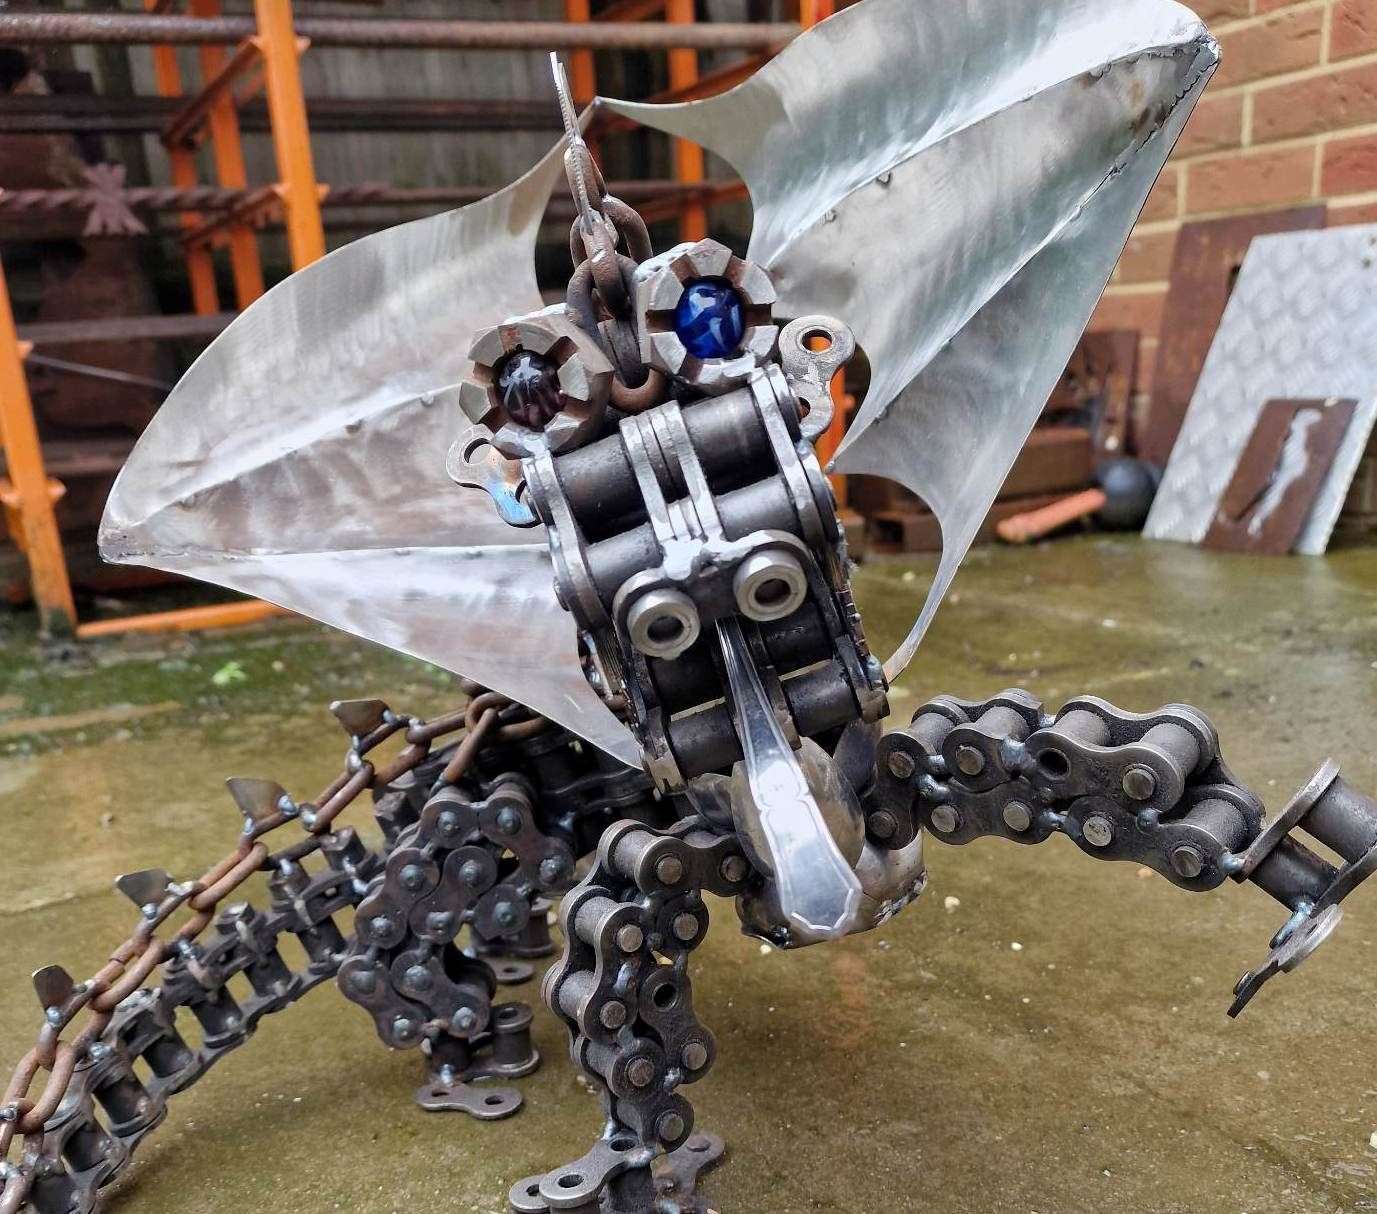 Mr Allcorn made this dragon sculpture out of odd bits and bobs. Picture: Jon Allcorn